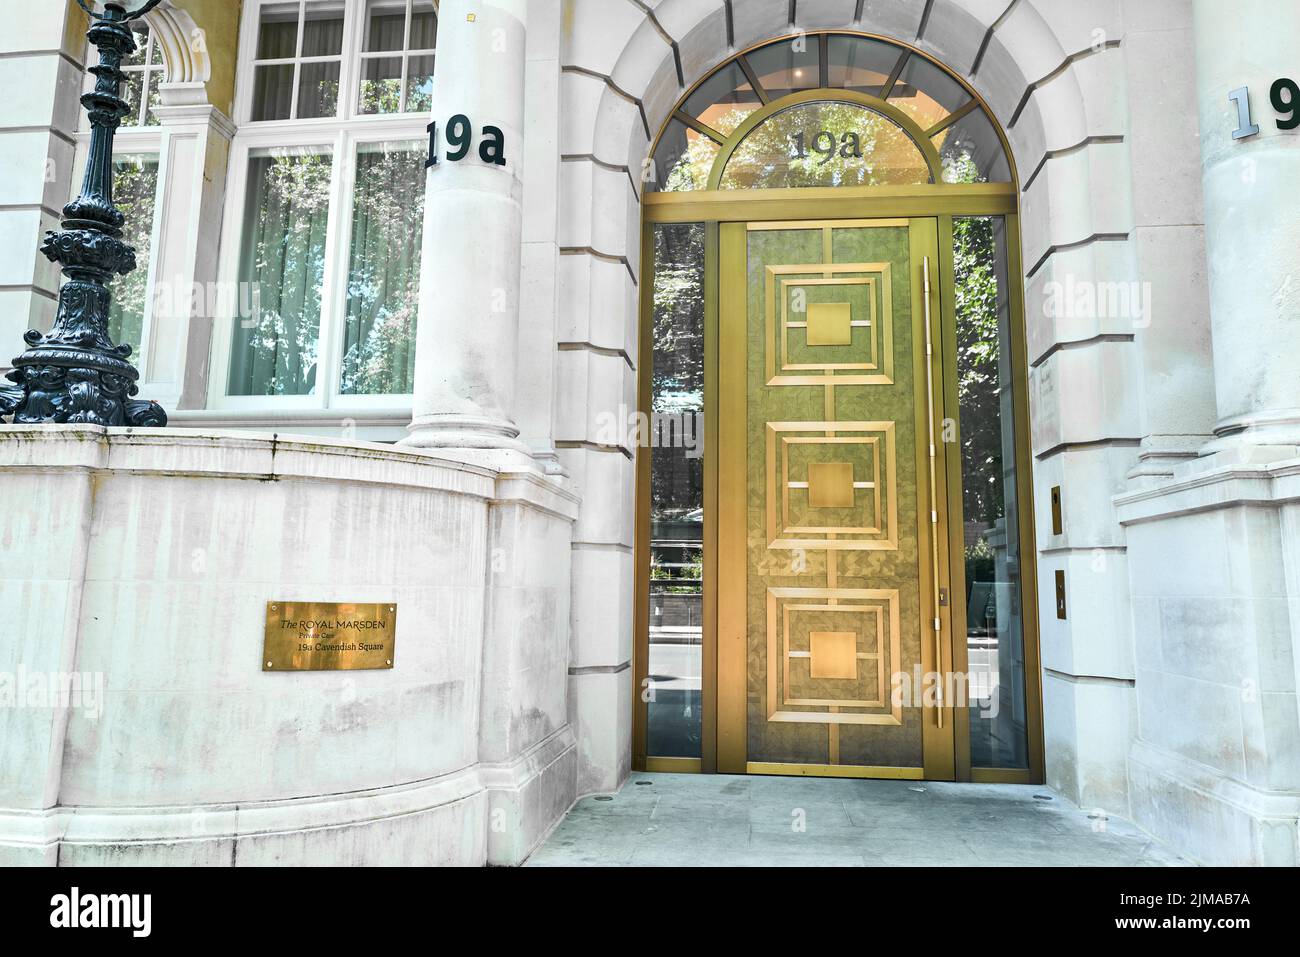 The Royal Marsden private care at 19a Cavendish Square, London, England.. Stock Photo